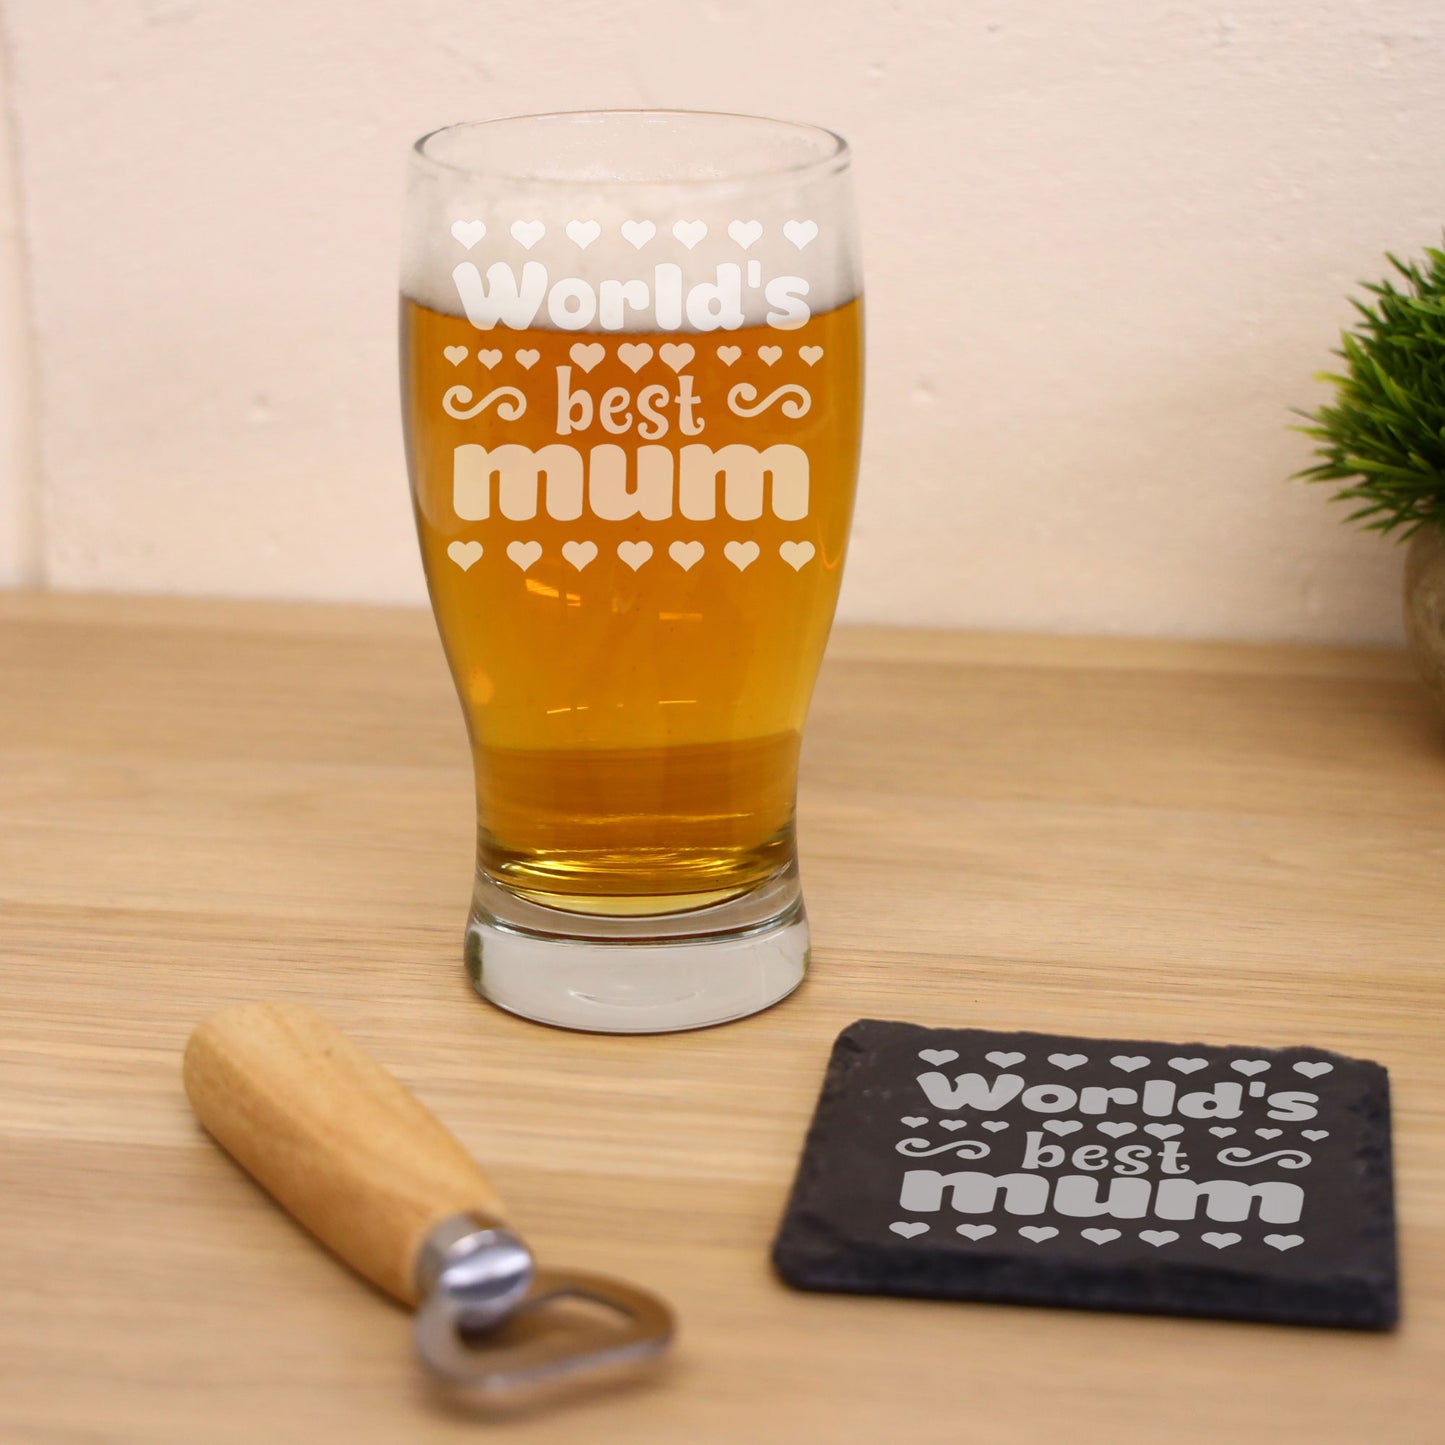 Worlds Best Mum Engraved Beer Glass and/or Coaster Set  - Always Looking Good - Glass & Square Coaster Set  